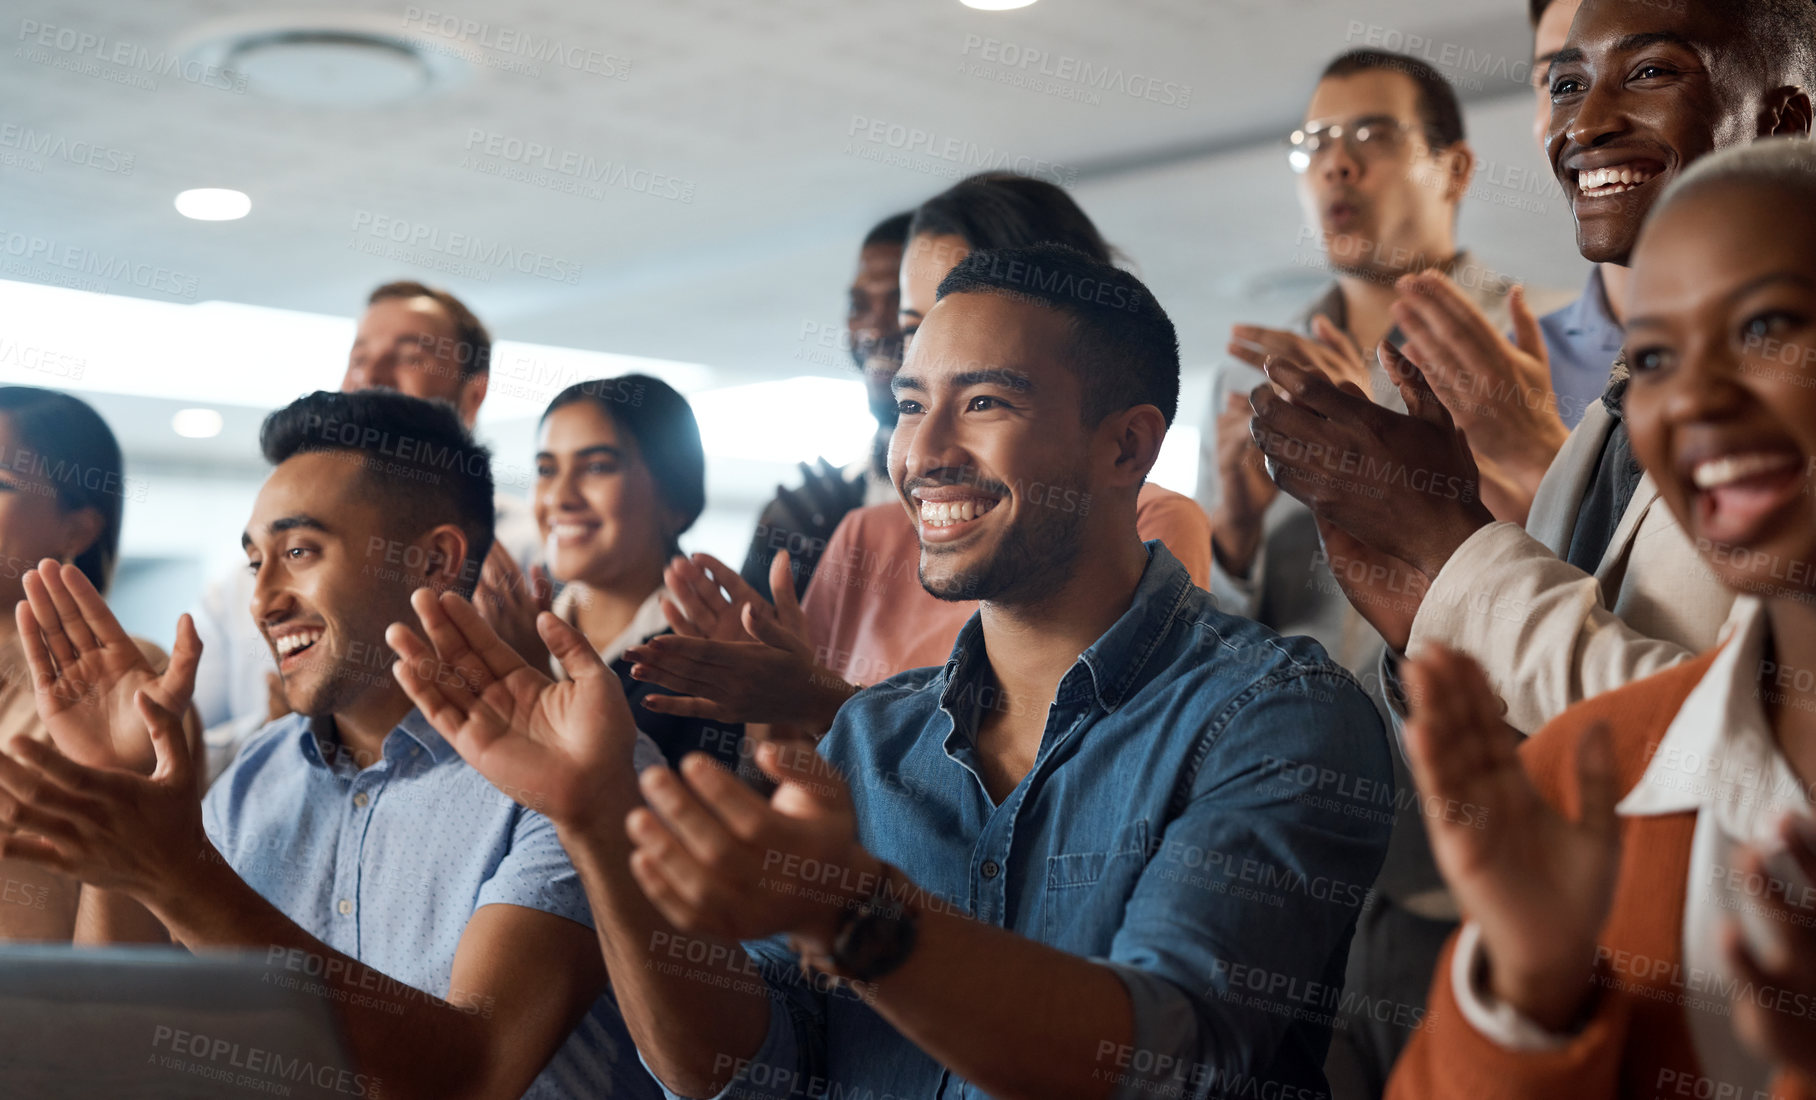 Buy stock photo Applause, support and wow with a business team clapping as an audience at a conference or seminar. Meeting, motivation and award with a group of colleagues or employees cheering on an achievement